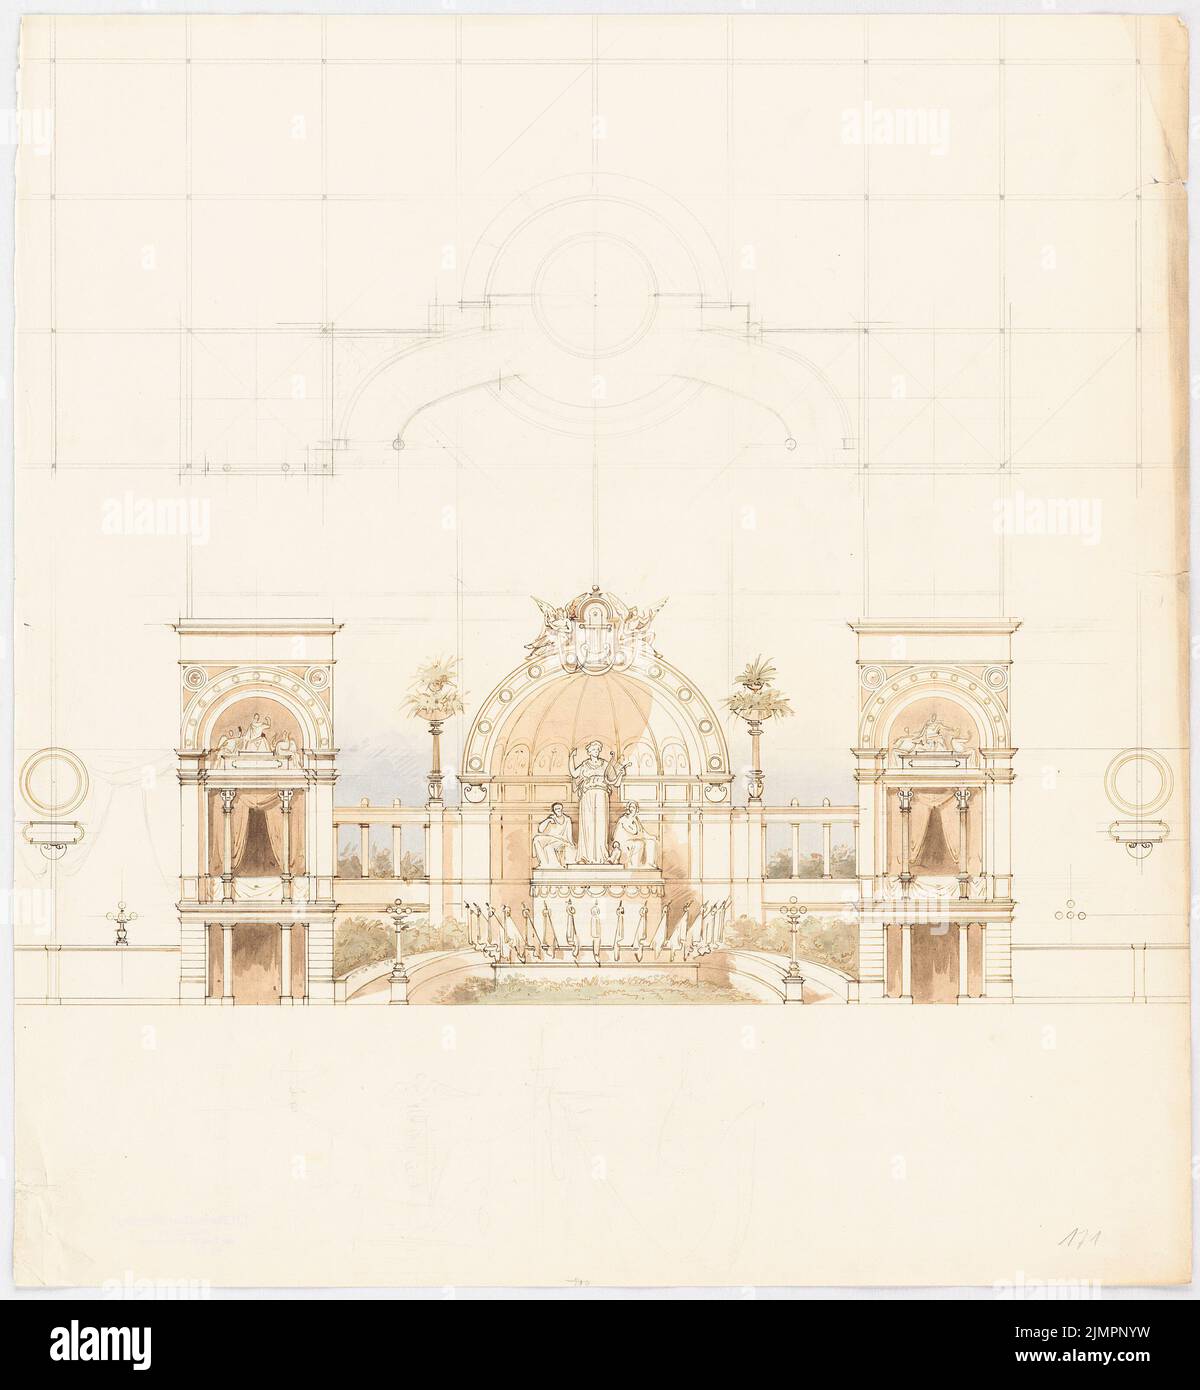 Lange Emil (1841-1926), glass palace in Munich. Remodeling (without date): Pavilion in front of the main entrance in floor plan and recourse. Pencil, ink watercolor on cardboard, 52.5 x 48.5 cm (including scan edges) Lange Emil  (1841-1926): Glaspalast, München. Umgestaltung Stock Photo